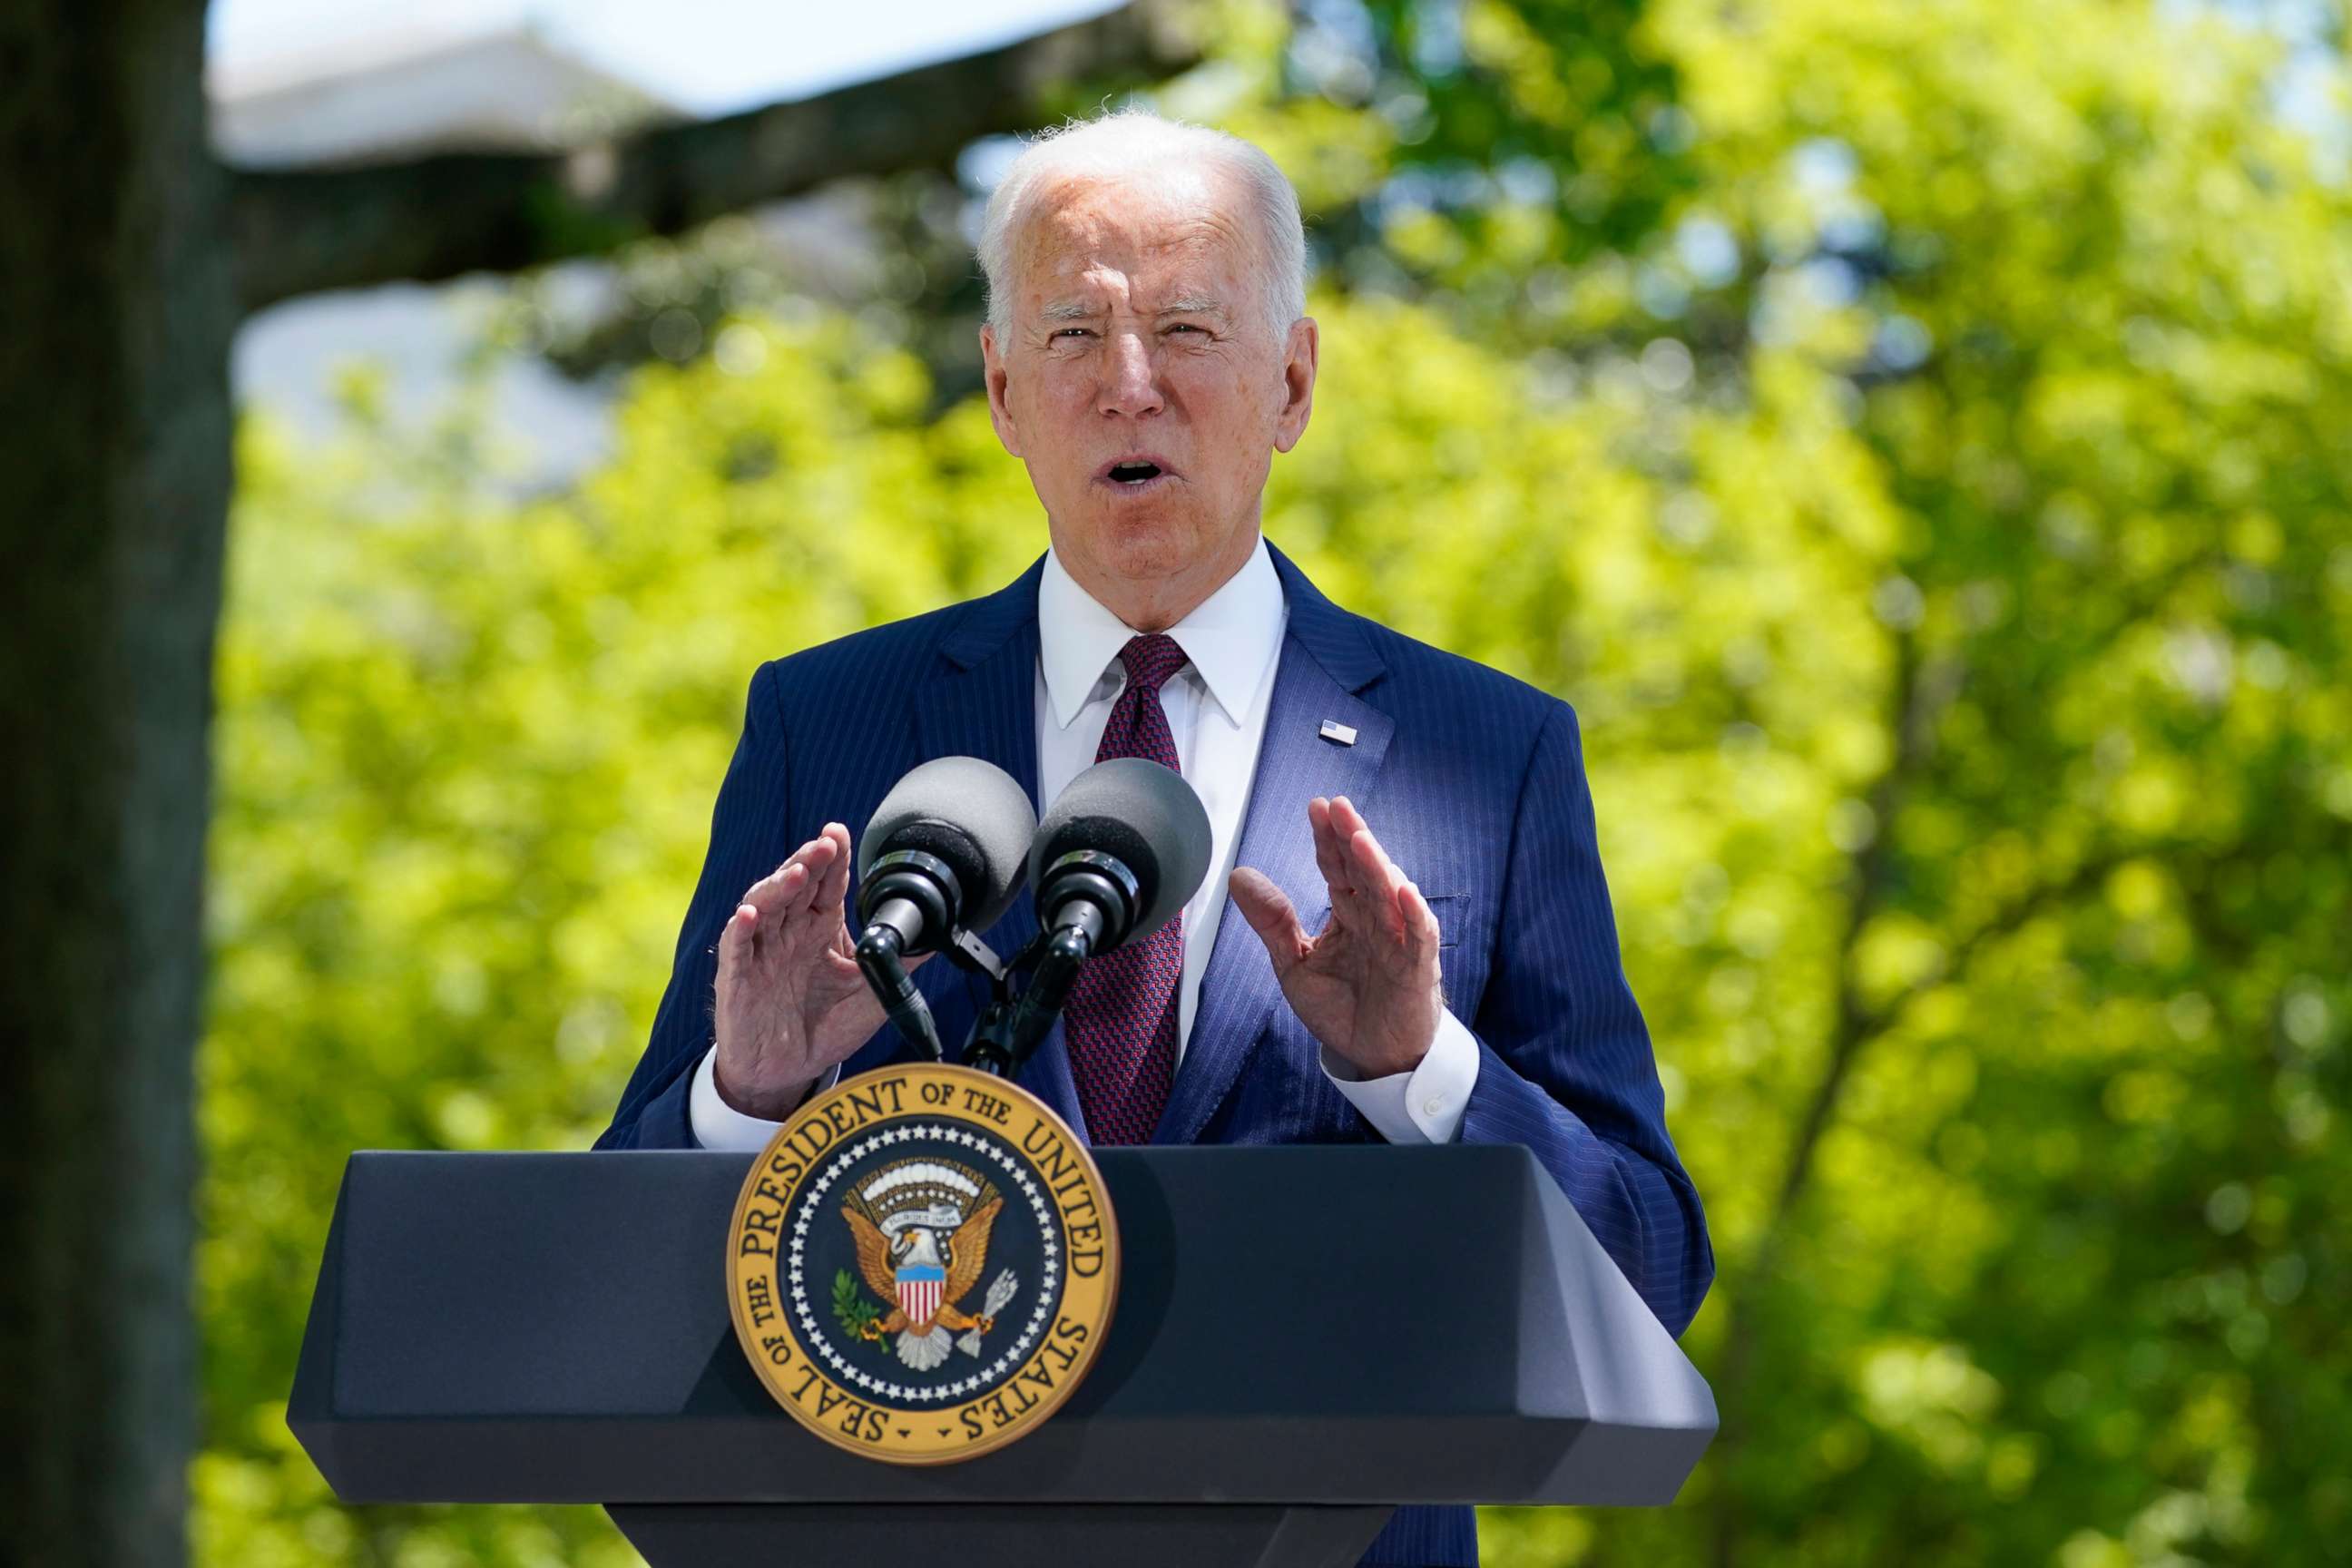 PHOTO: President Joe Biden speaks about COVID-19, on the North Lawn of the White House, on April 27, 2021, in Washington, D.C.